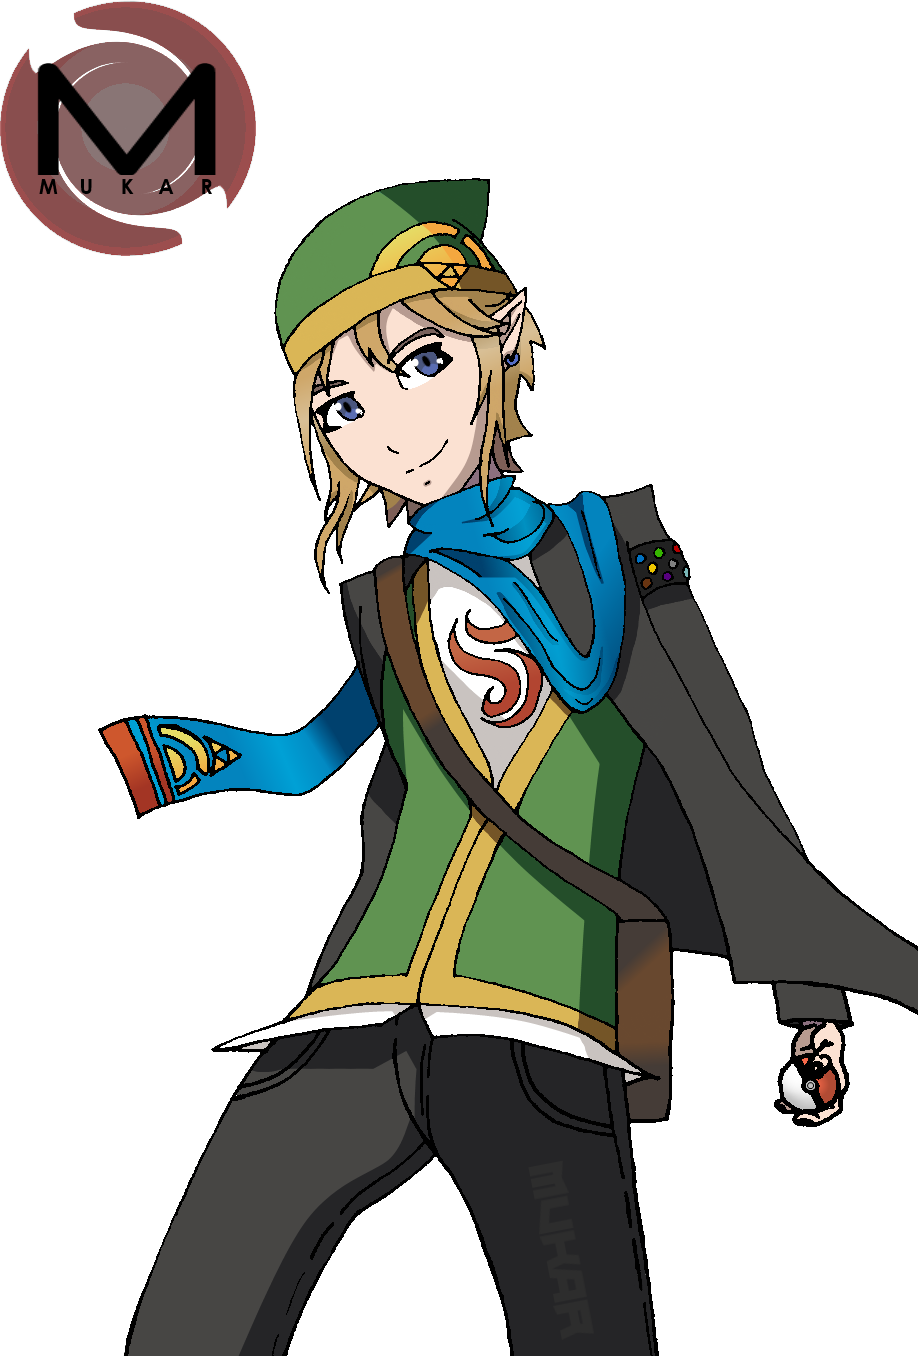 Pokemon Trainer Link Render By Siranime On Deviantart - Link As A Pokemon Trainer (918x1356)